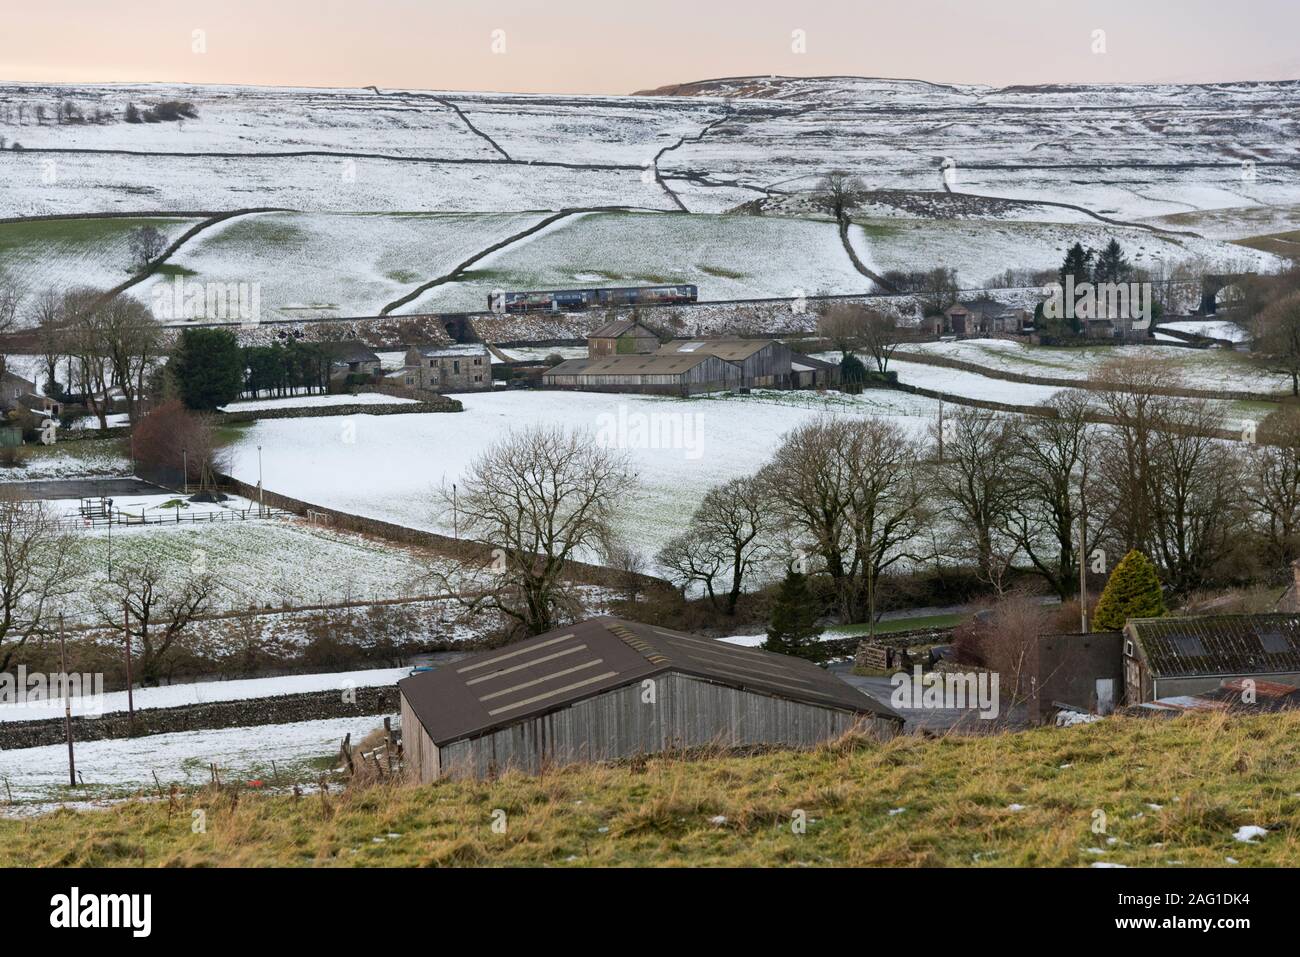 A Sprinter passenger train heads south on the Settle-Carlisle railway line amid a snowy scene at Horton-in-Ribblesdale, Yorkshire Dales National Park Stock Photo